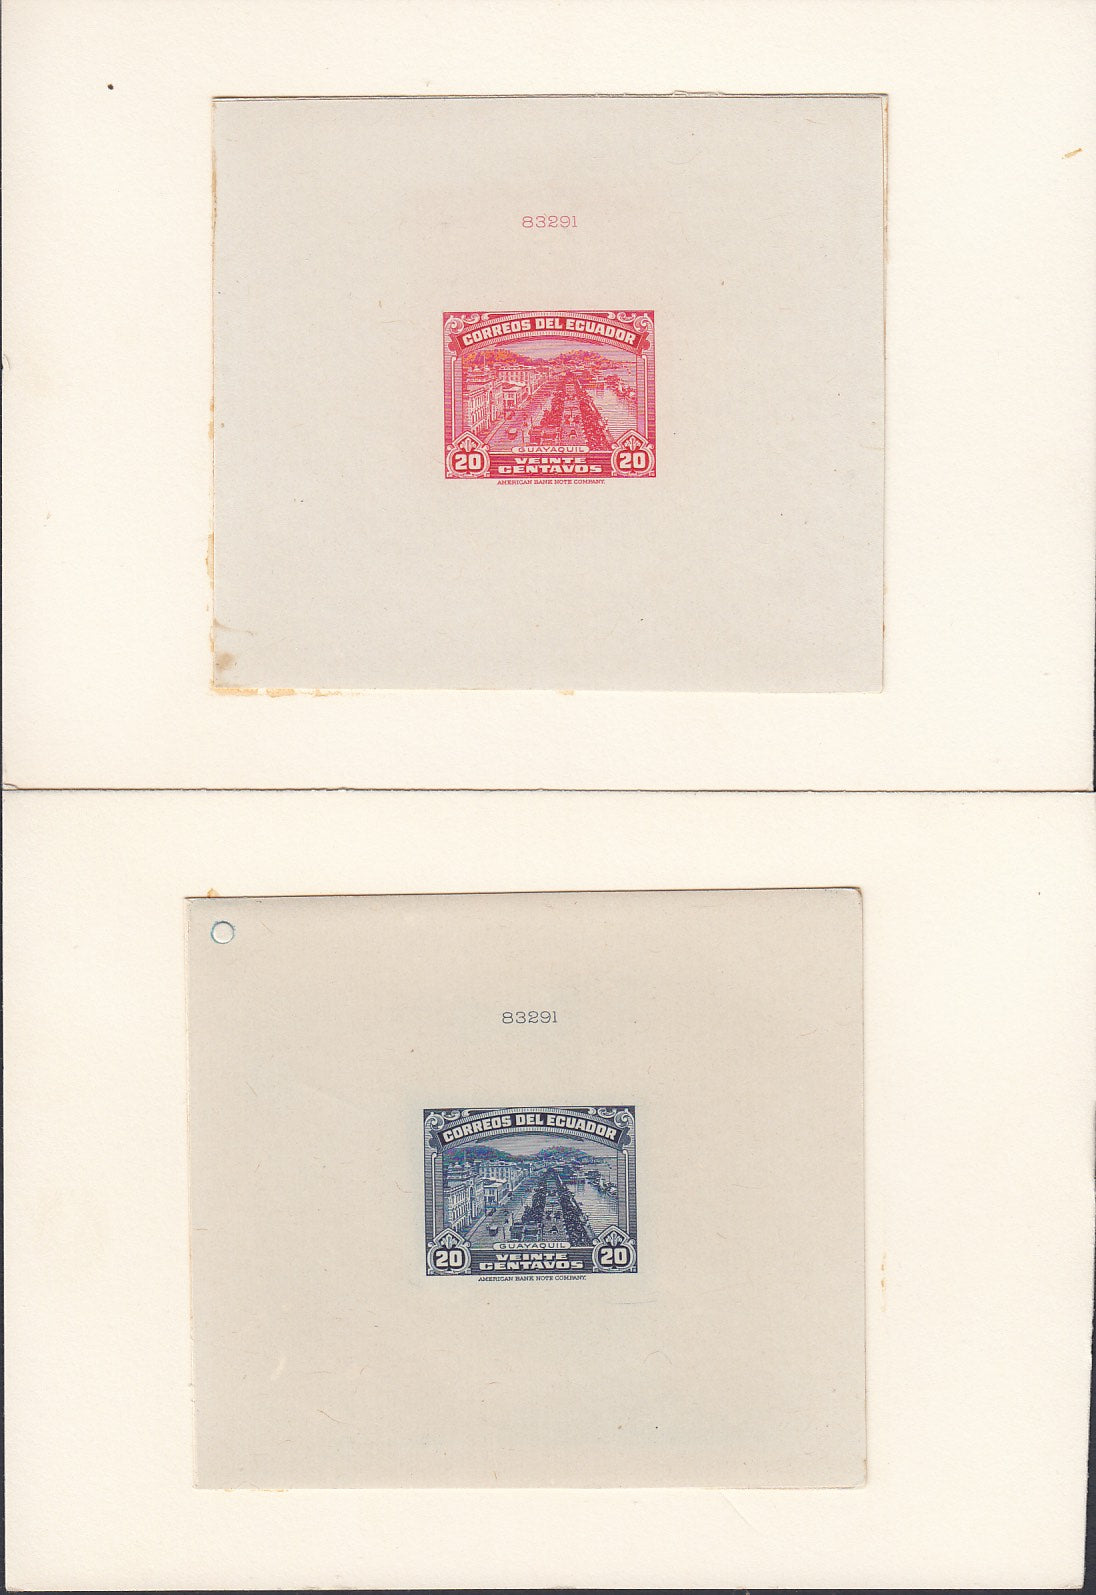 Ecuador 1942-44 View of Guayaquil Complete Set of Die Proofs. Scott 408-408A